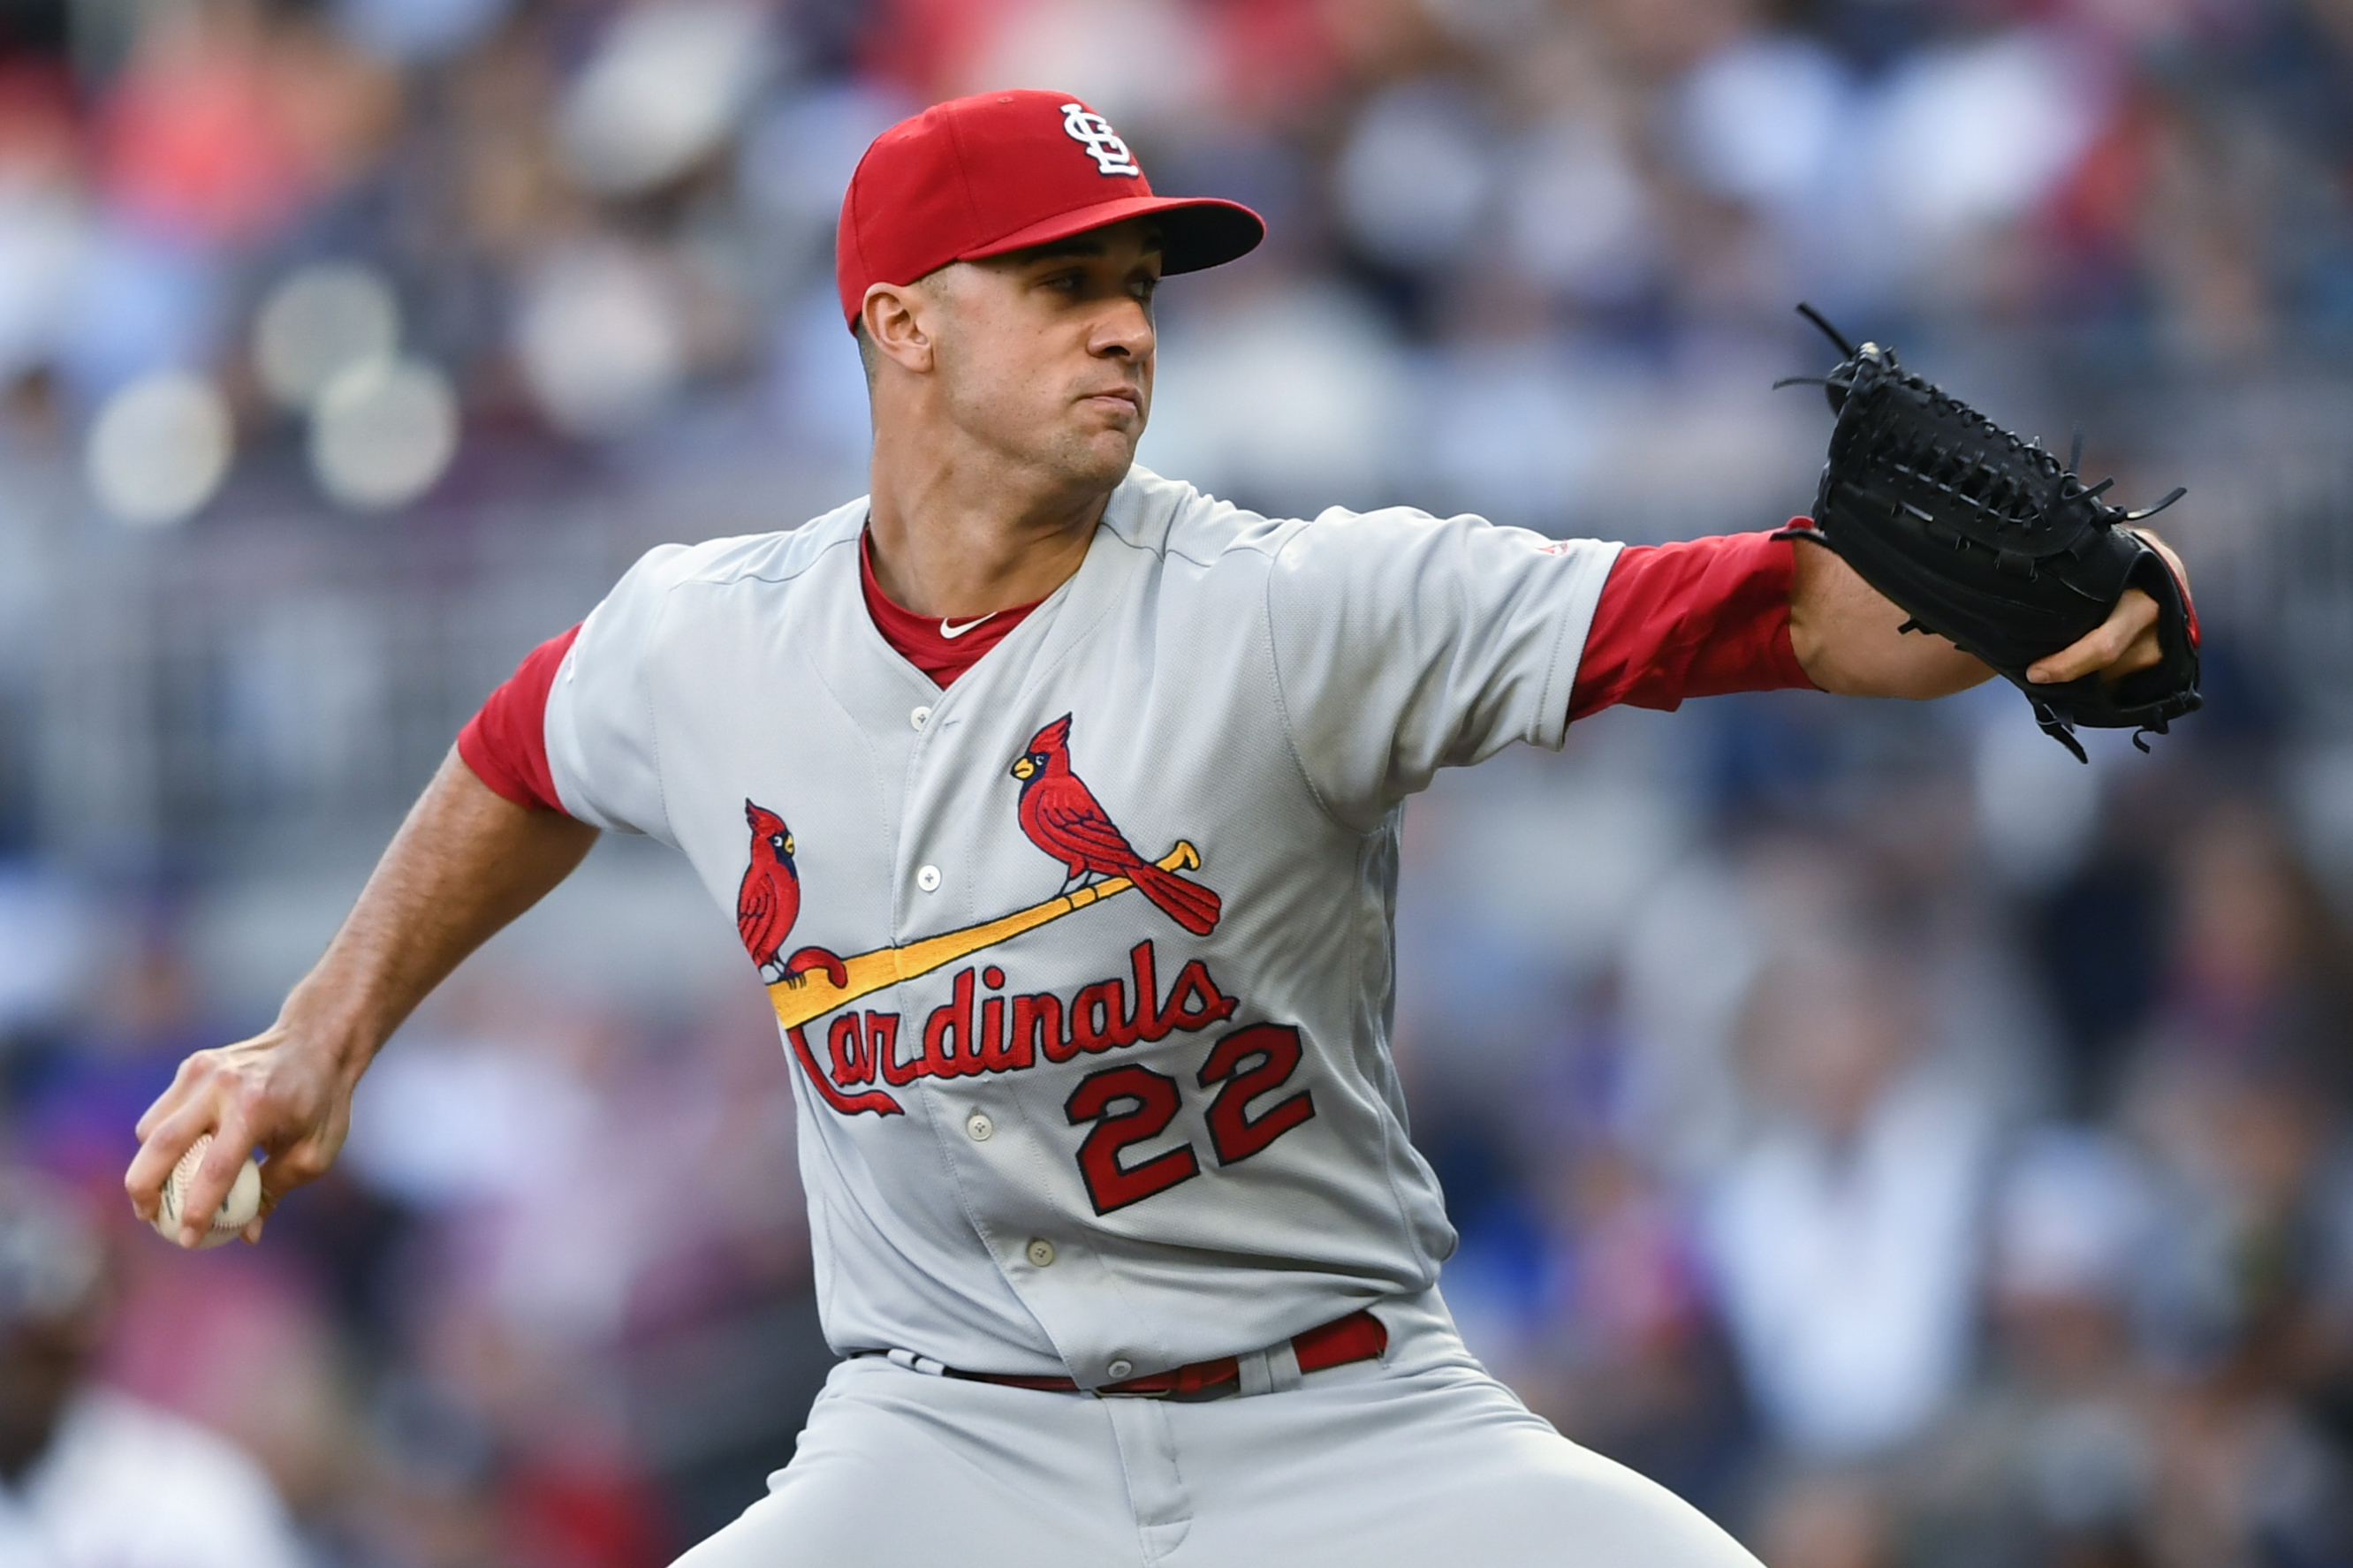 Cards hit 4 HRs to support Flaherty in 14-3 win over Braves